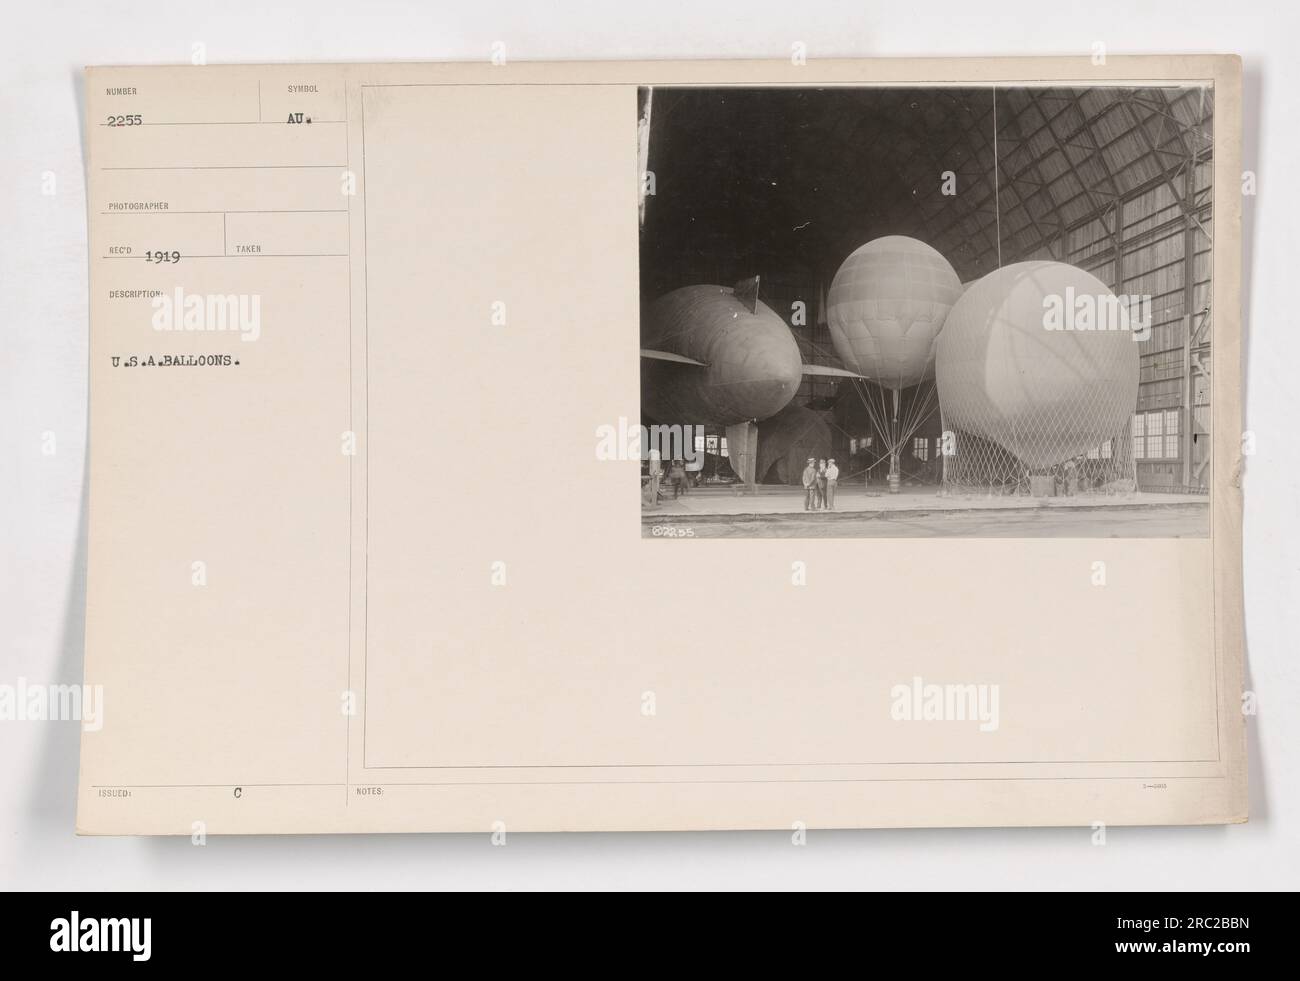 Caption: 'This photograph, taken in 1919 by photographer NEGD, showcases American military activities during World War One. The image captures U.S.A. balloons used in the war effort. The symbol AU is visible on the balloons, denoting their purpose. The photograph offers a glimpse into the notable role of balloons during this period.' Stock Photo